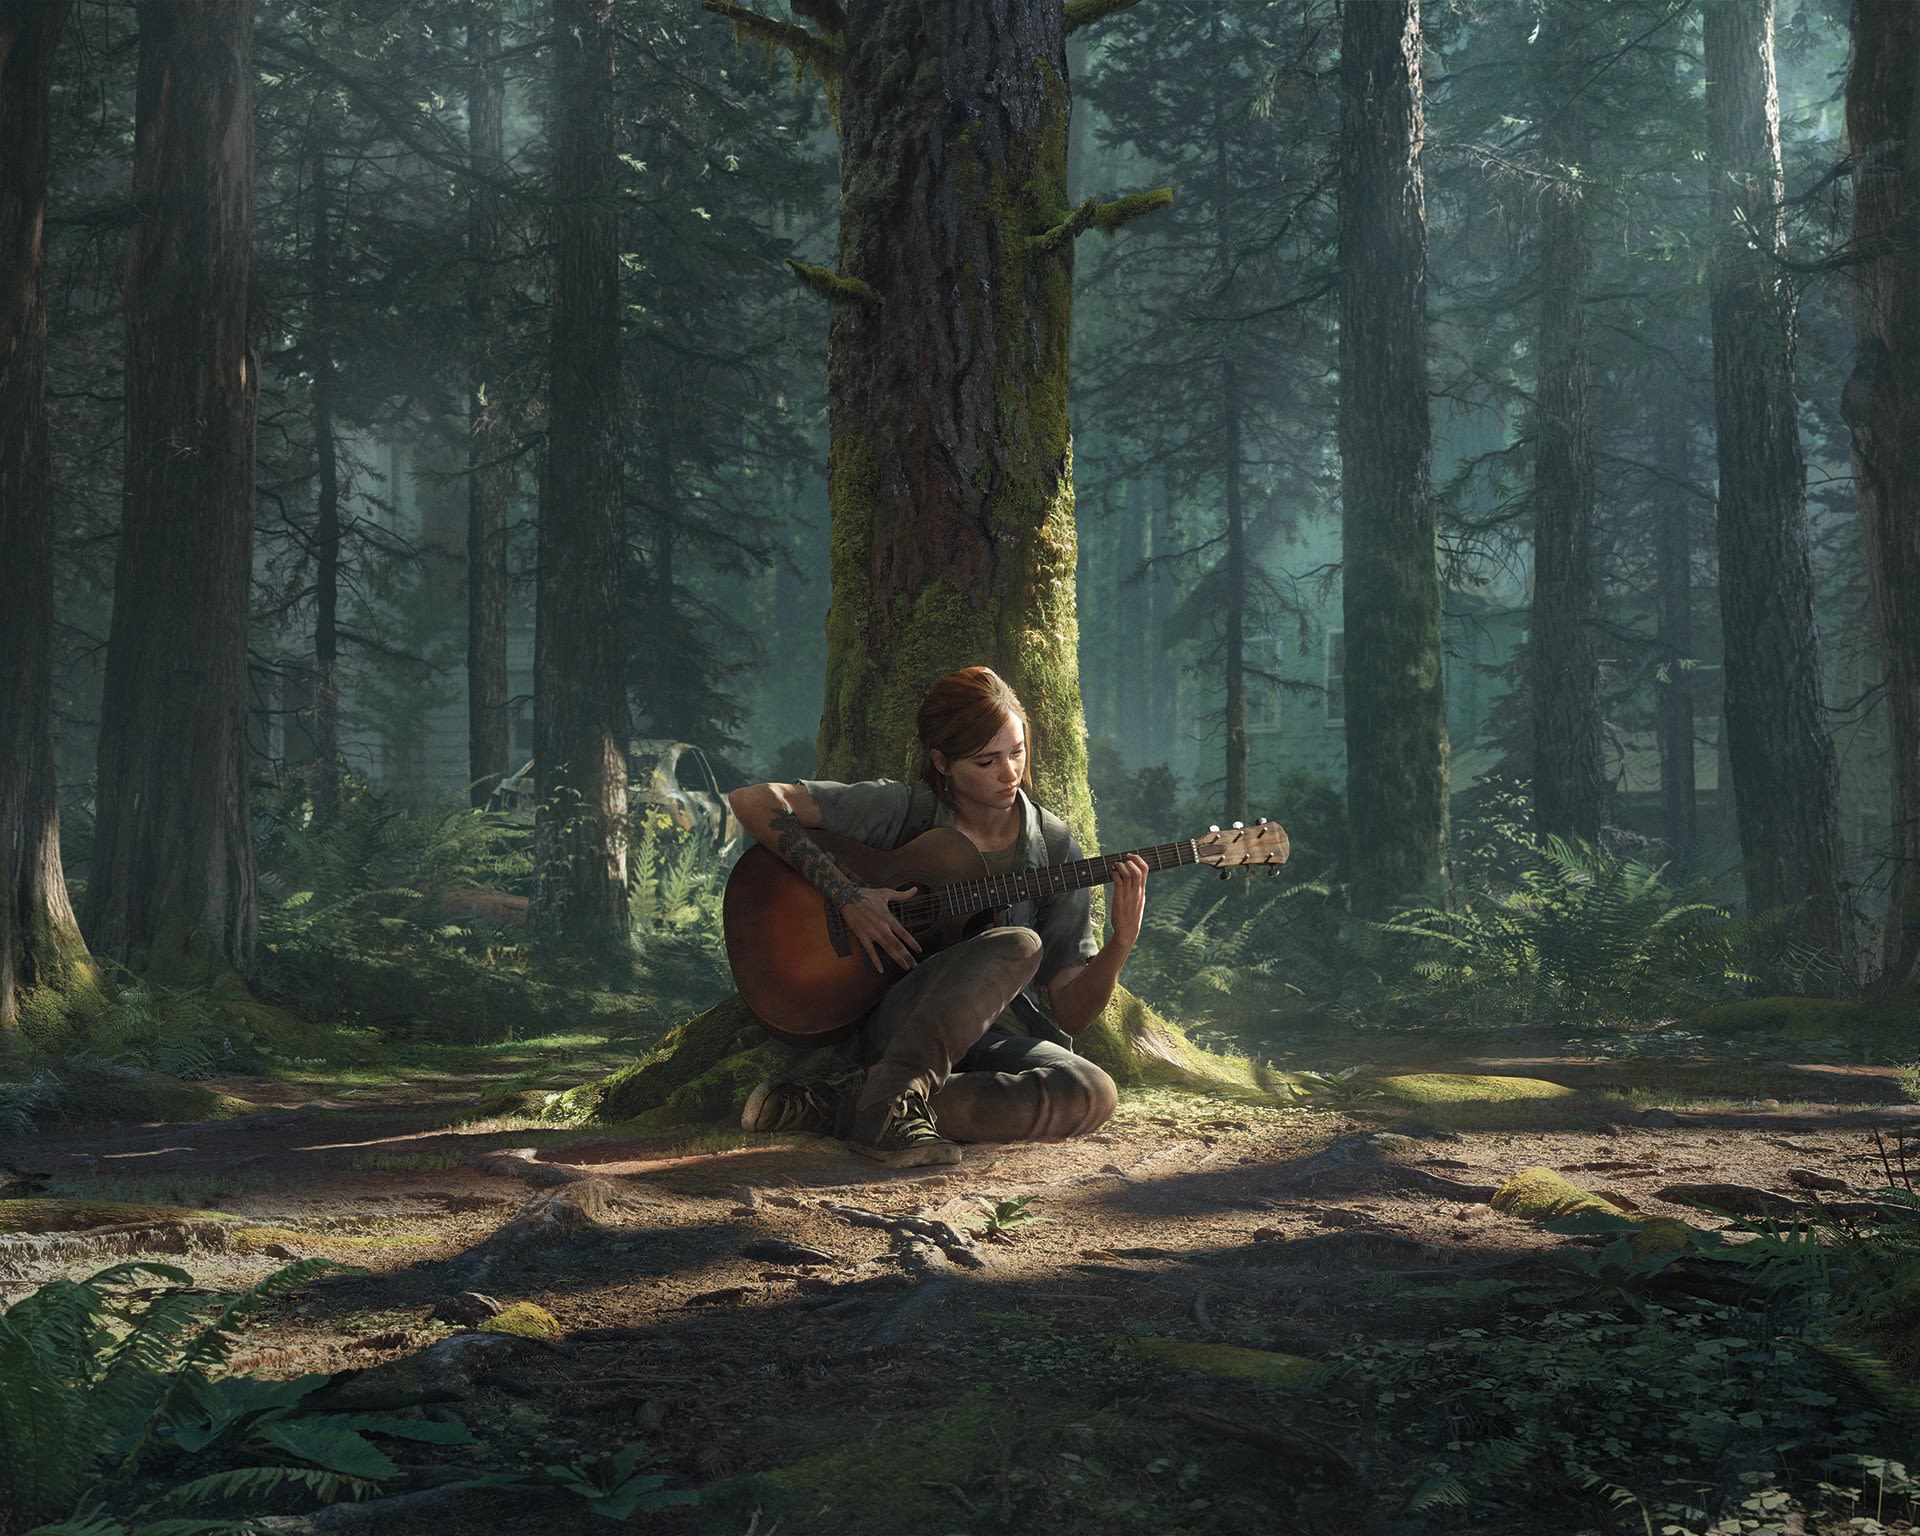 Naughty Dog, LLC - The many looks of Ellie in The Last of Us Part